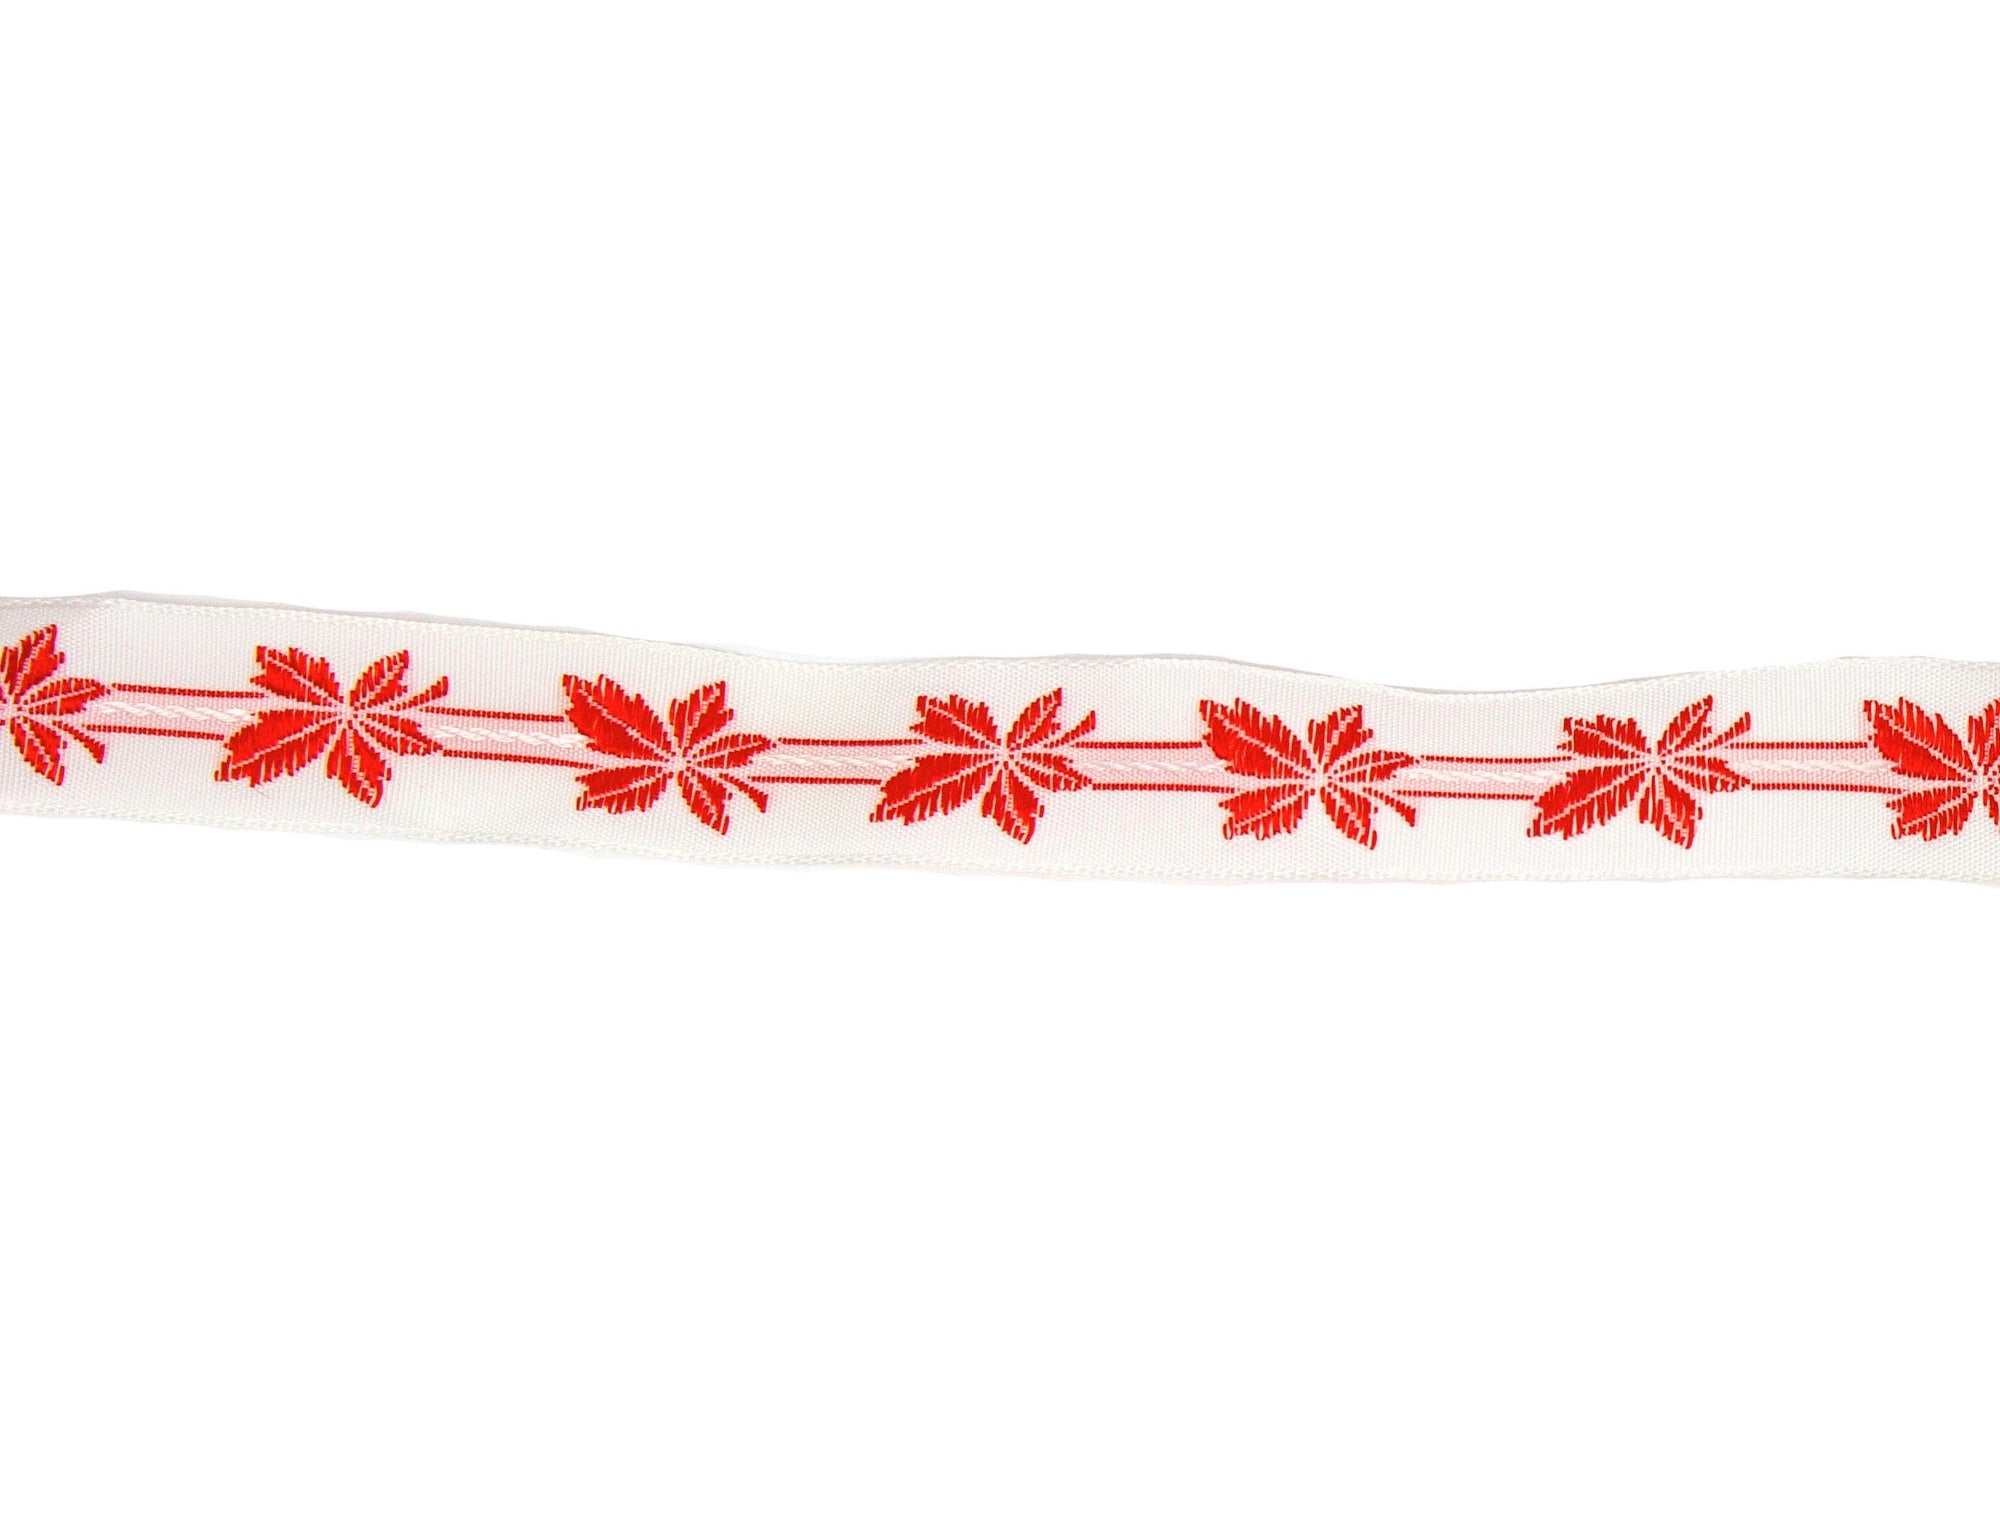 Vintage Ribbon Trim Embroidered White with Red Leaves 1/2 Wide - One Piece  2 Yards Long